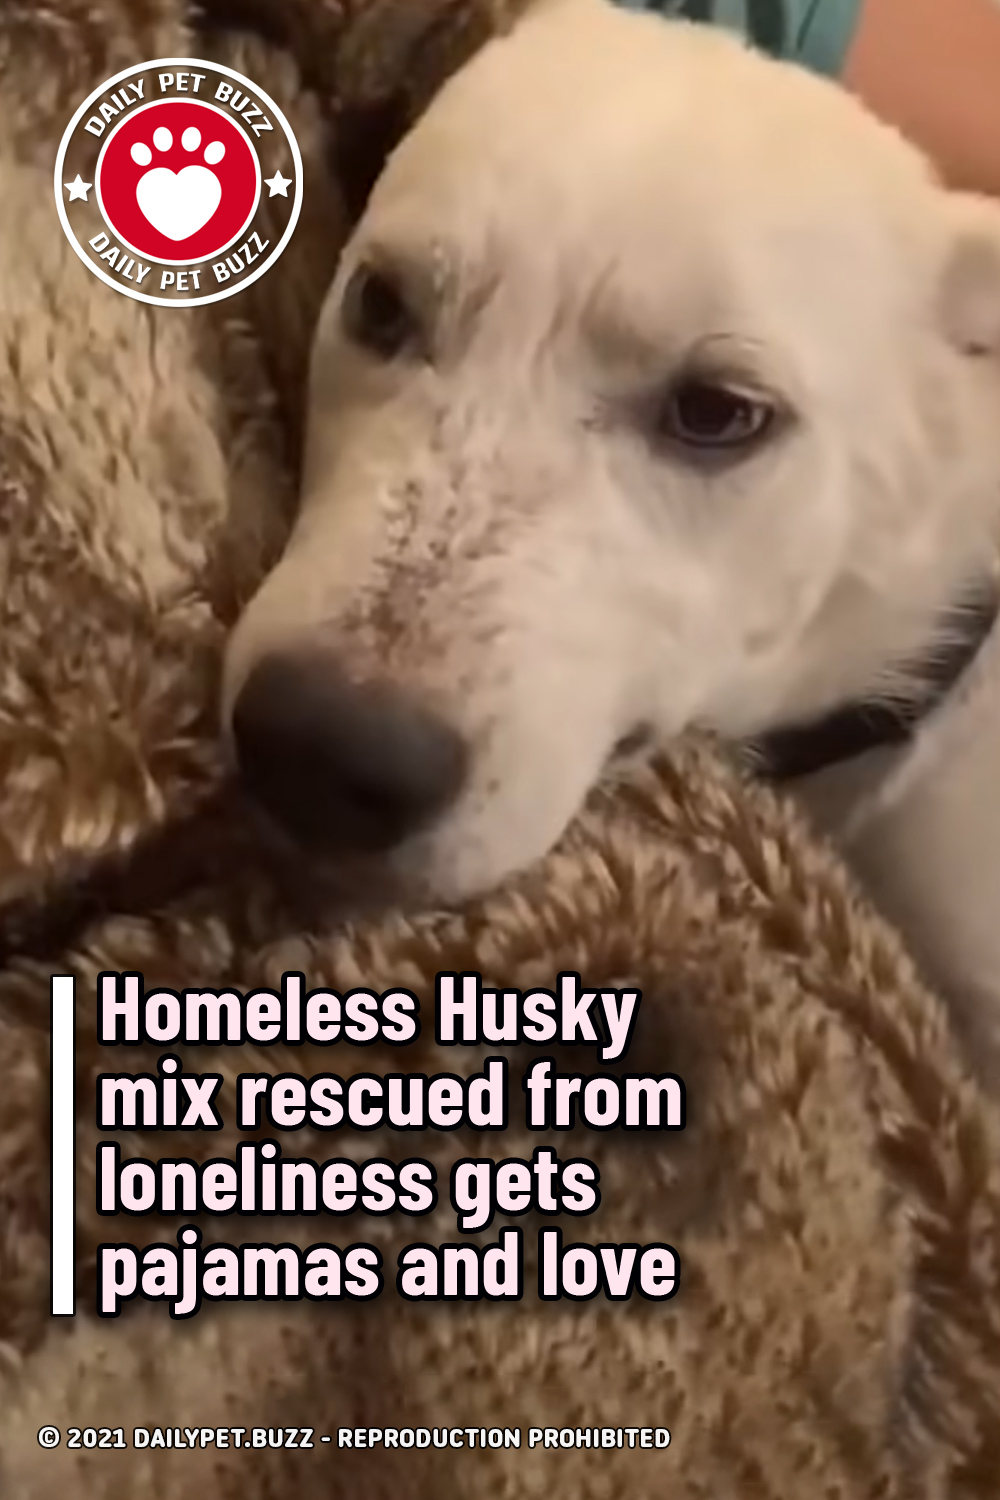 Homeless Husky mix rescued from loneliness gets pajamas and love